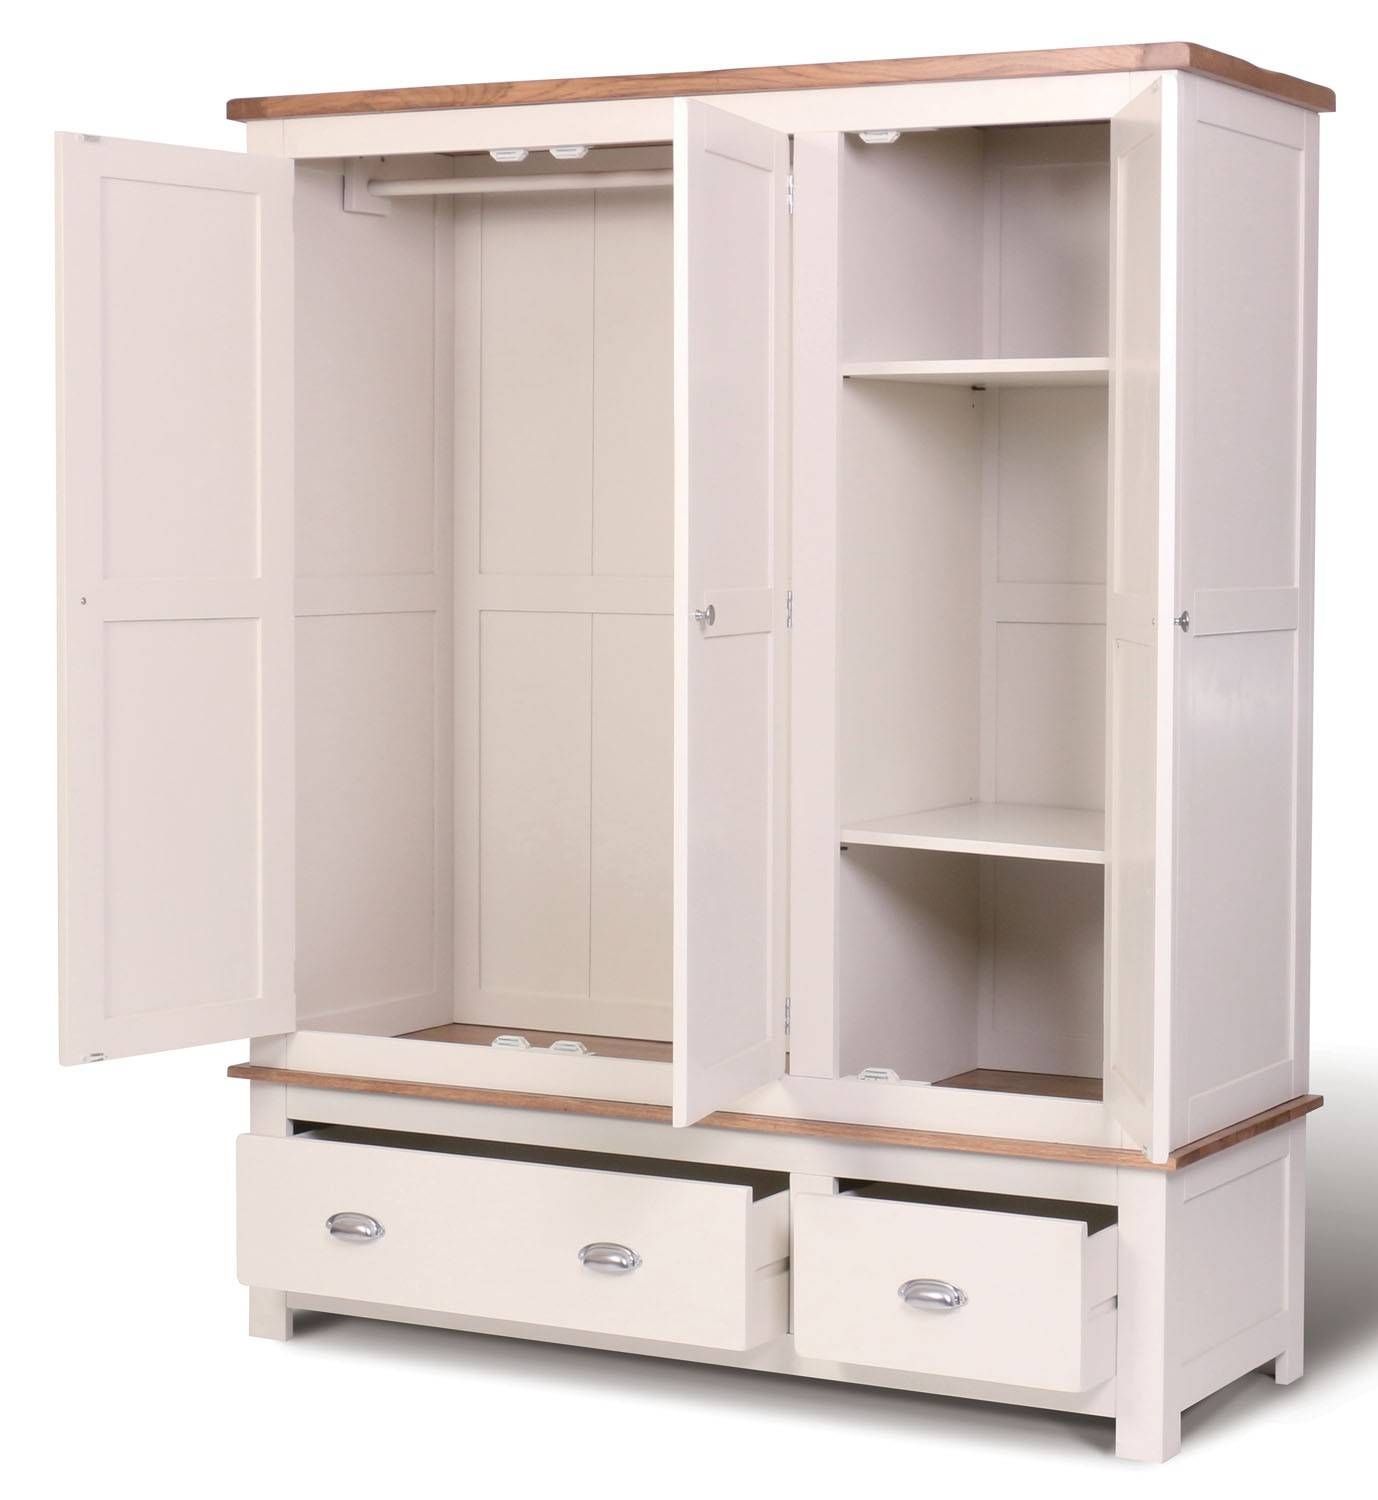 Ascot Triple Wardrobe With Drawers – Wardrobes – Bedroom | Hallowood Throughout Triple Wardrobes With Drawers (View 2 of 15)